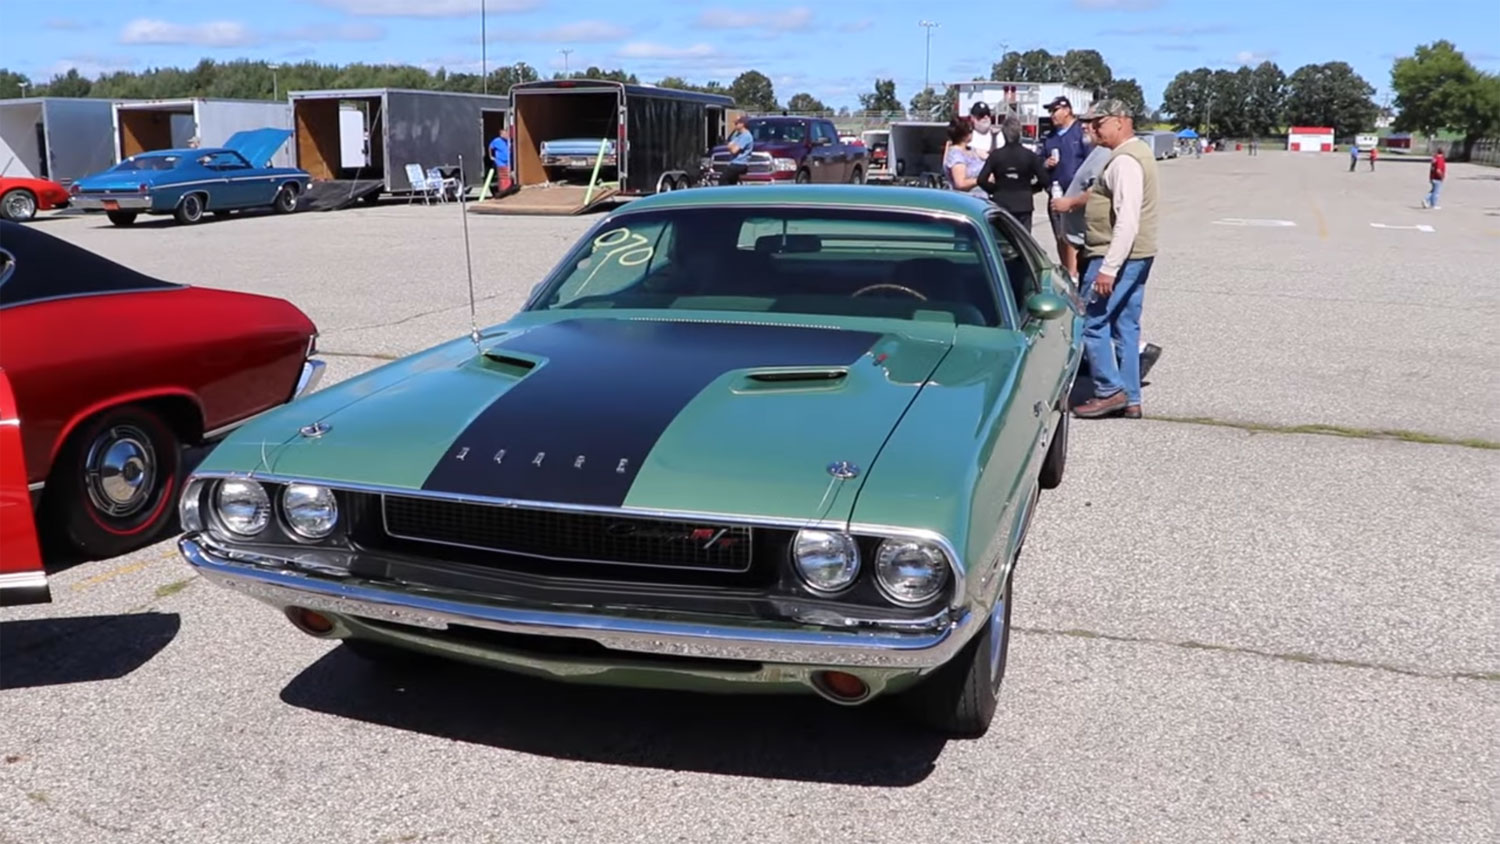 1969 Chevy Camaro SS Races 1970 Dodge Challenger R/T: Video